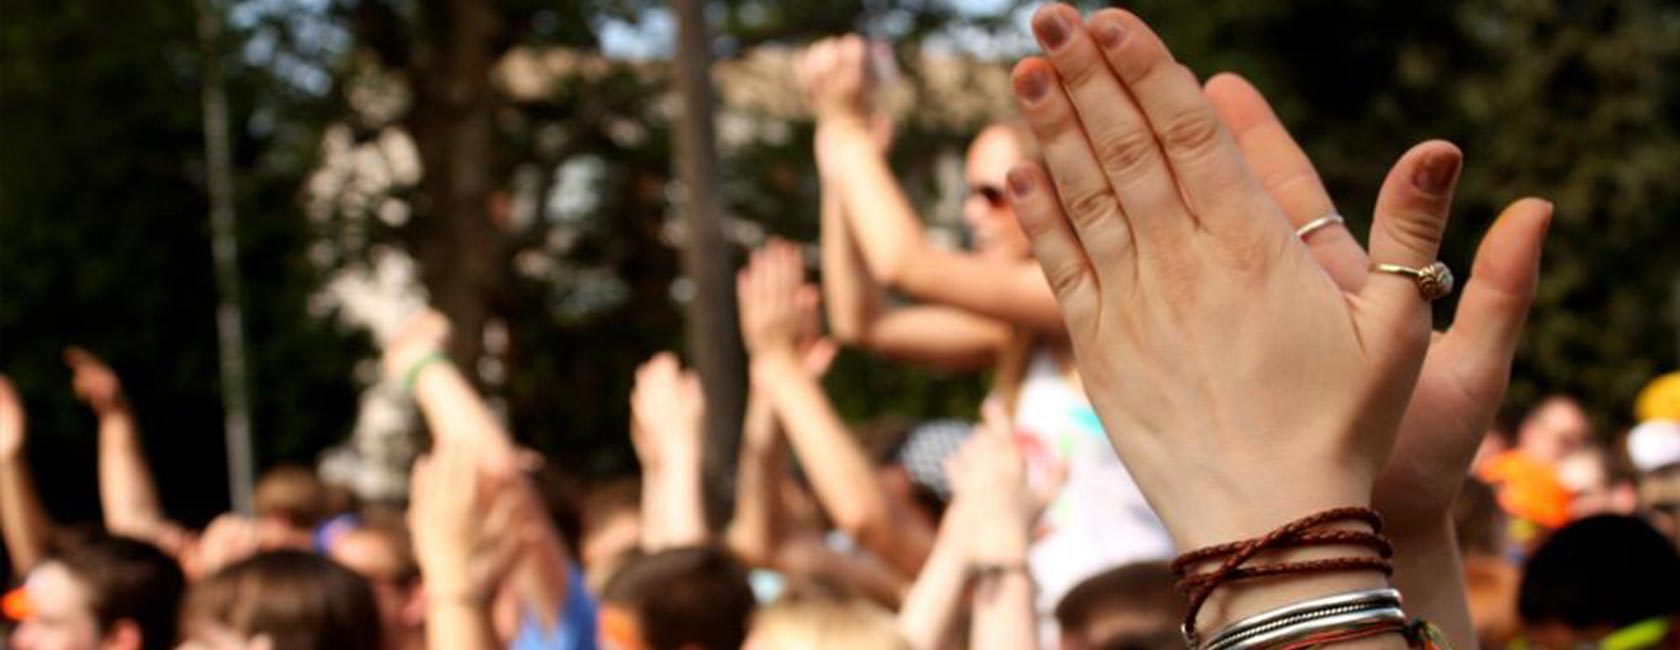 LollaPLUza concert, up close photo of hands clapping